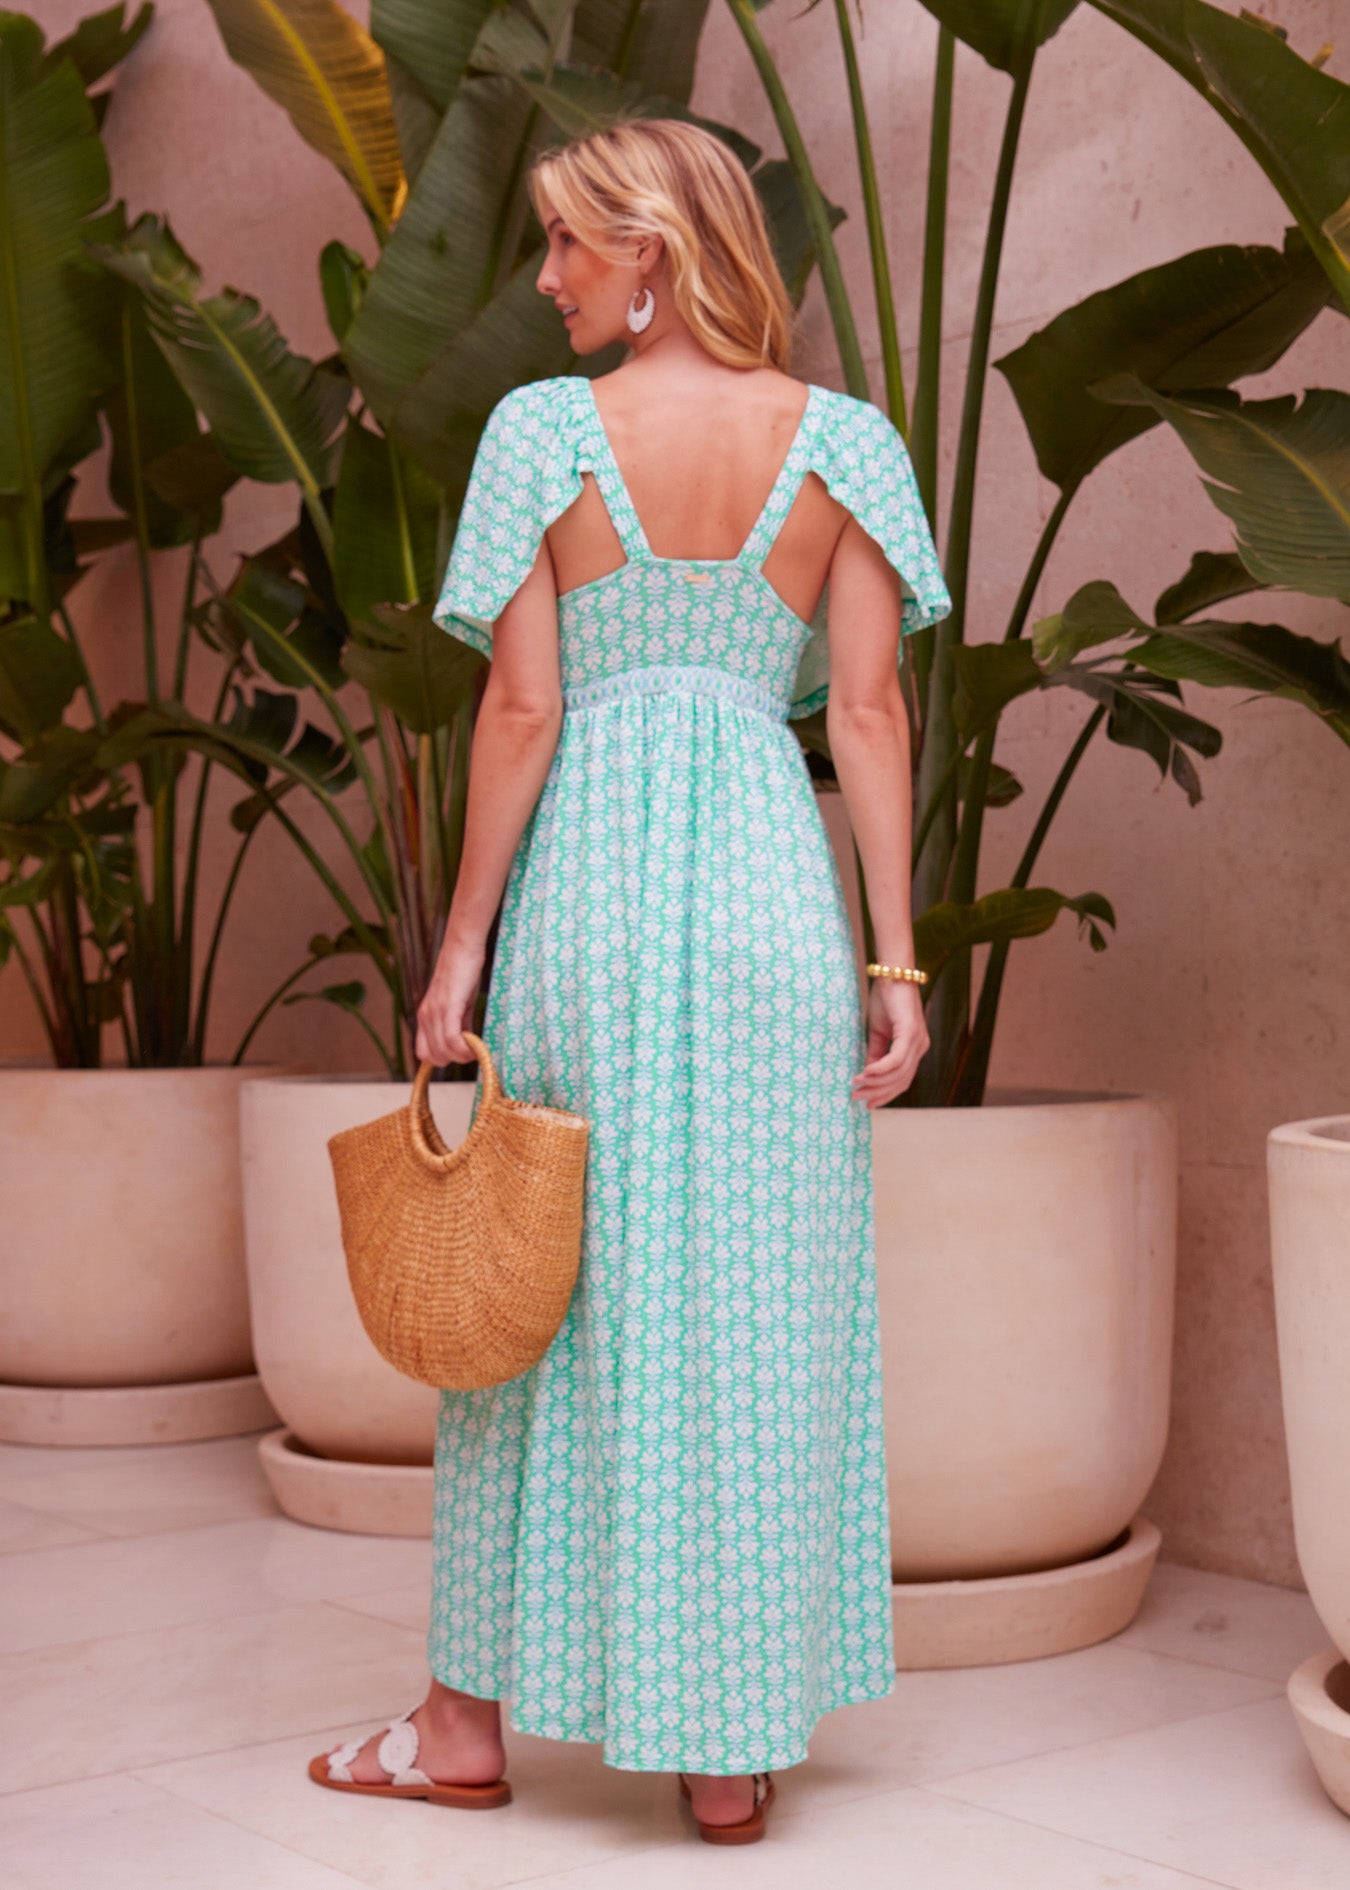 Back of a woman with blonde hair standing in front of potted plants wearing the Cote D`Azur Flutter Sleeve Maxi Dress and holding a straw bag.